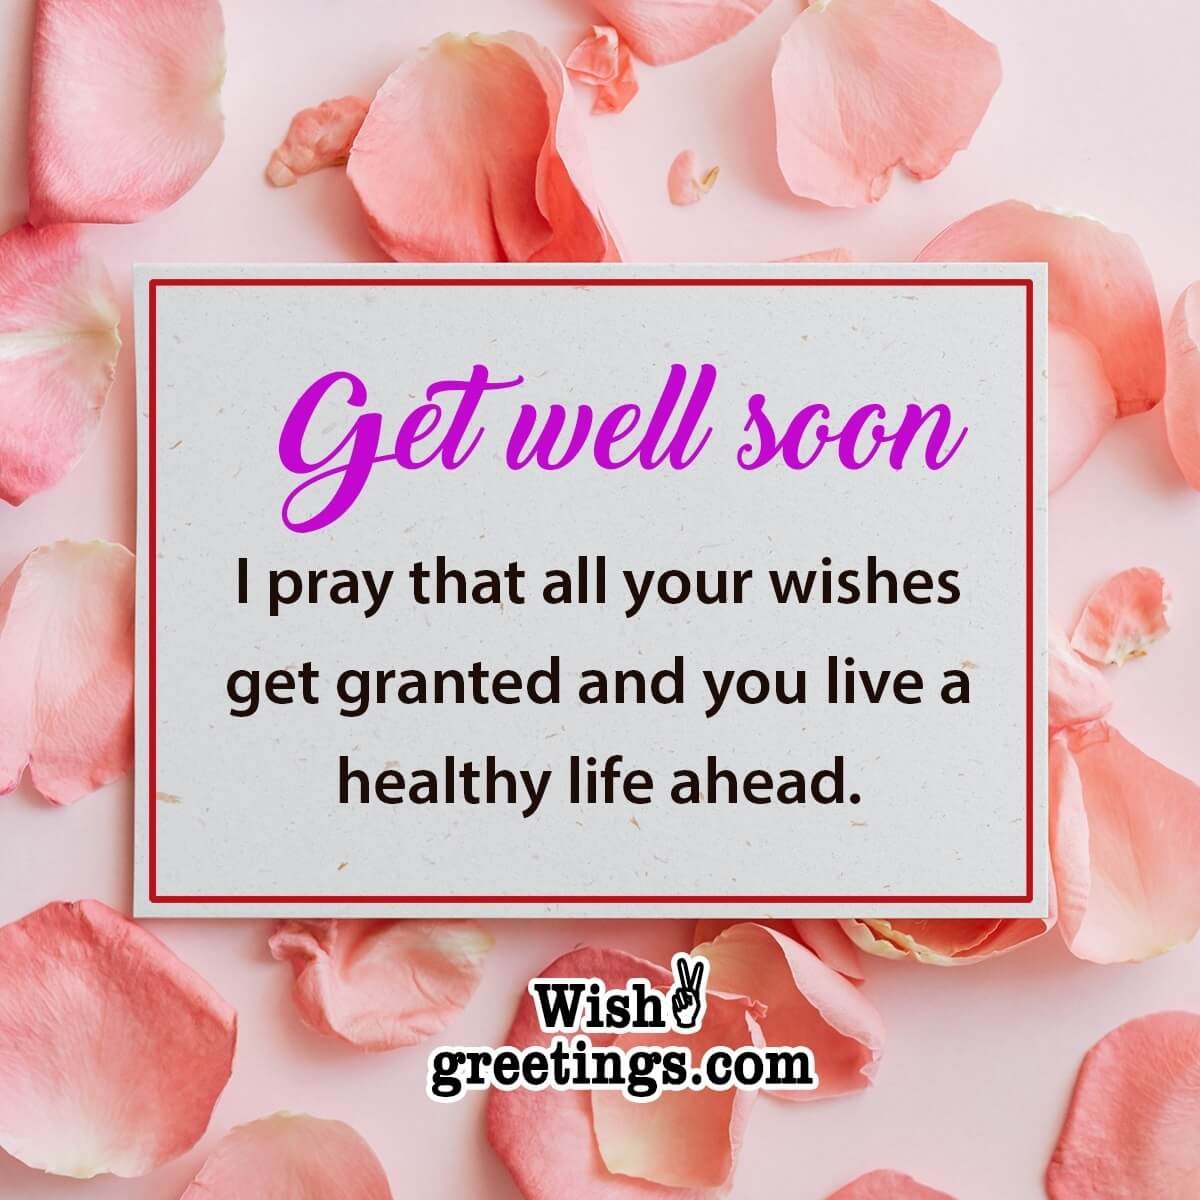 Religious Get Well Soon Messages - Wish Greetings